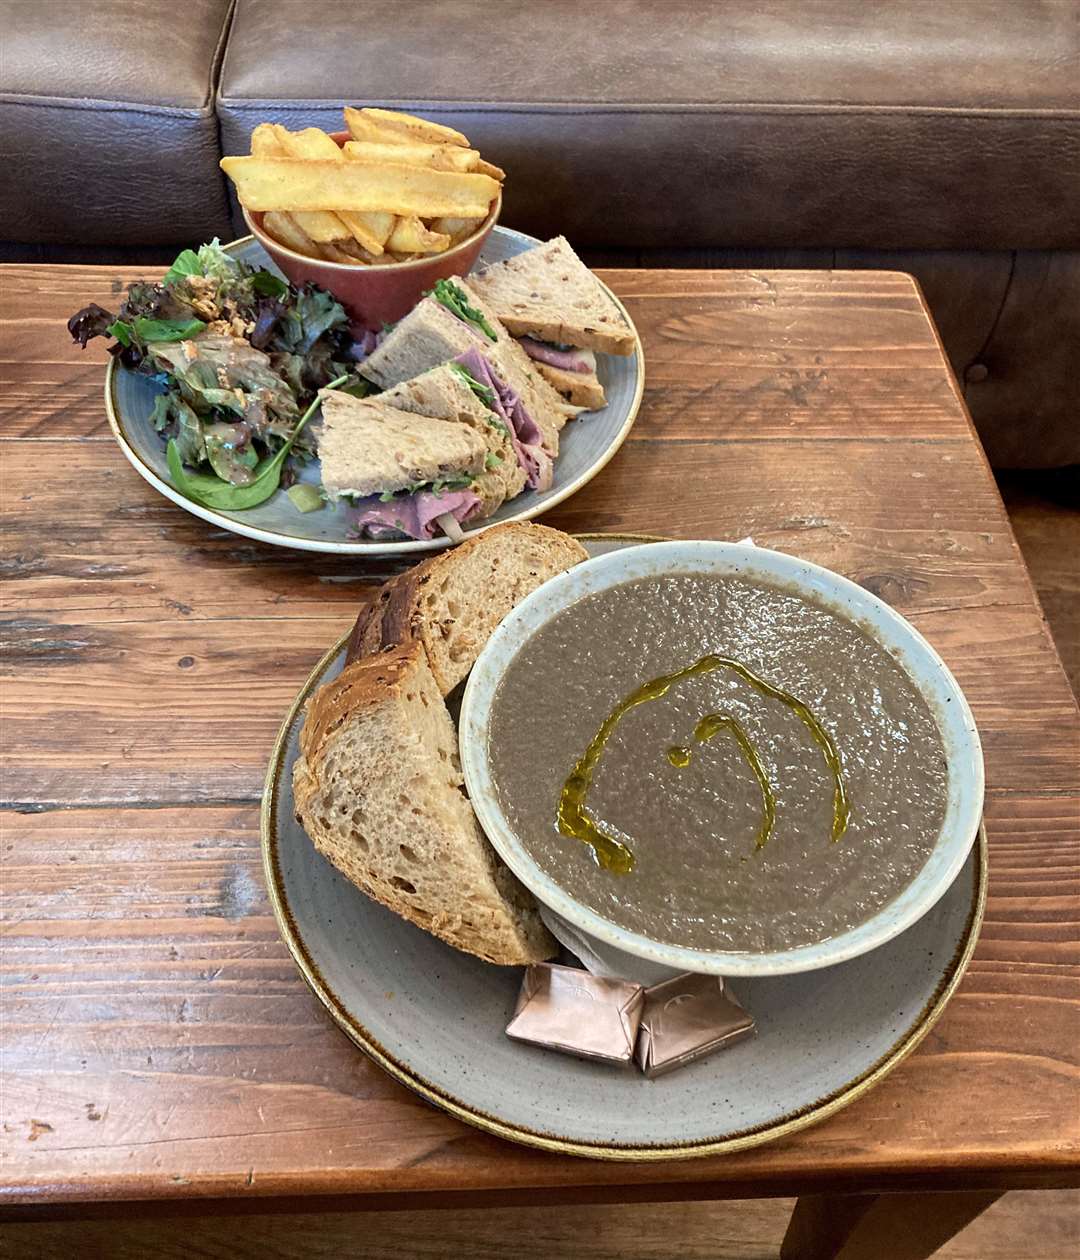 Garlic mushroom and rosemary soup with my slow roasted beef sandwich. Picture: Kev Hurst